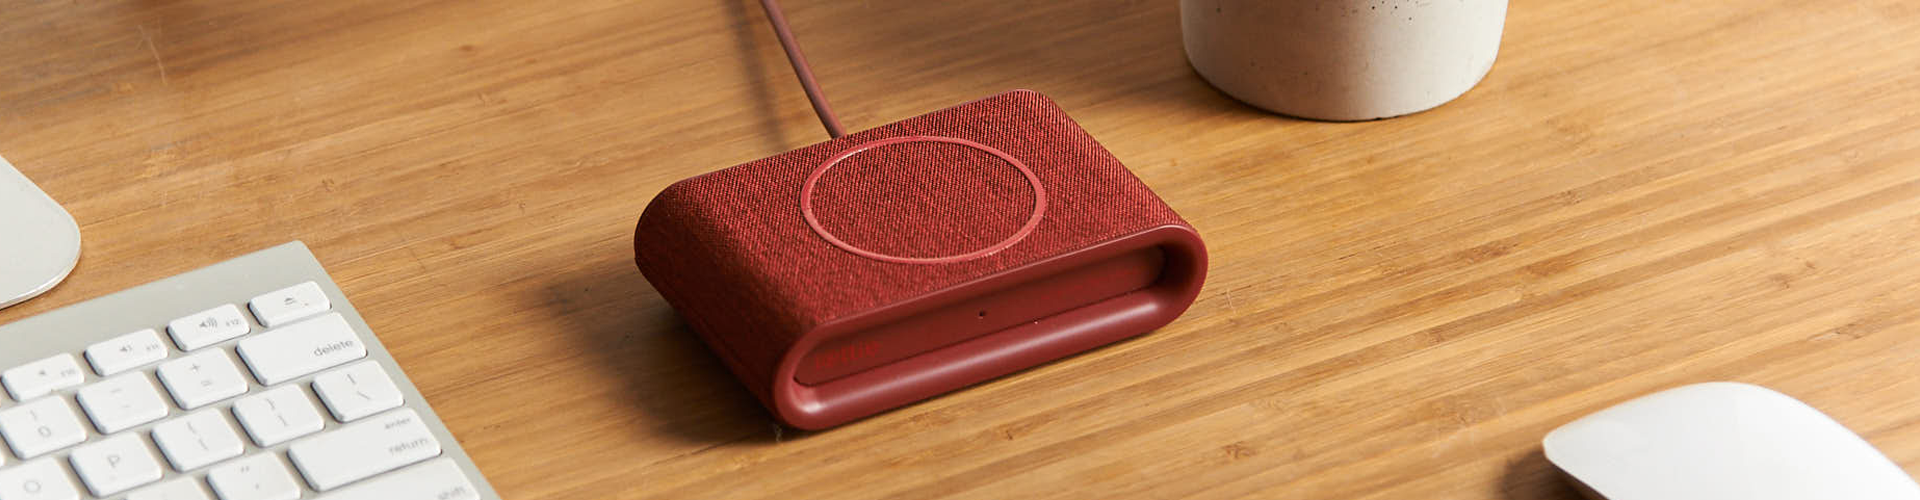 iON Wireless Plus Charging Pad in Ruby on Desk